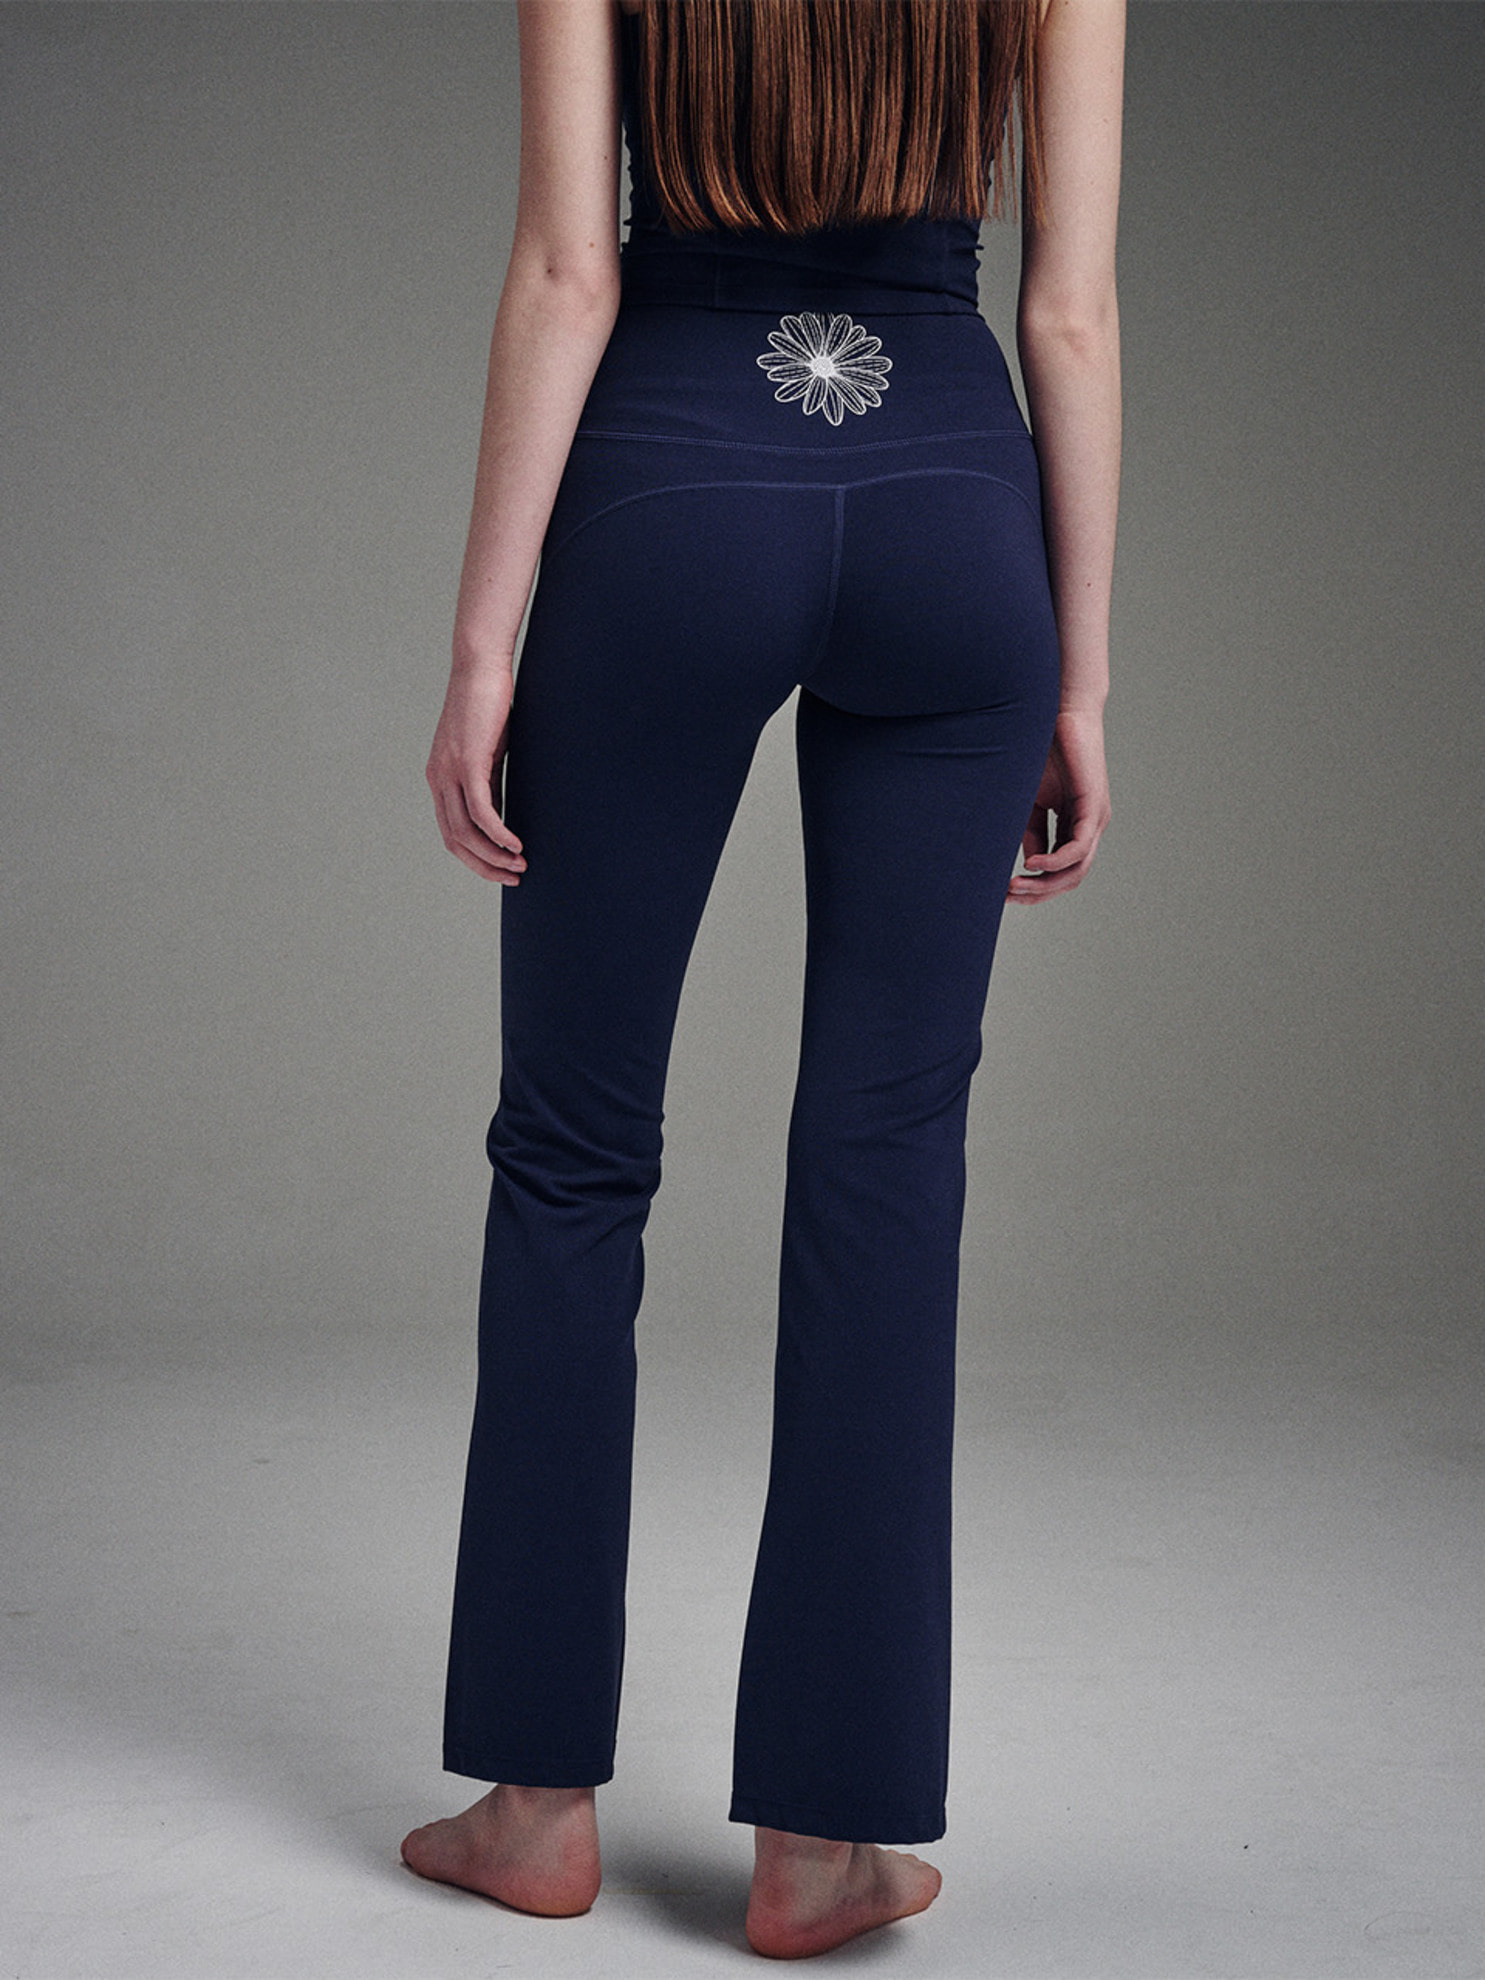 BEURRE ULTIMATE COMFORT bootcut leggings theflower_NAVY IVORY